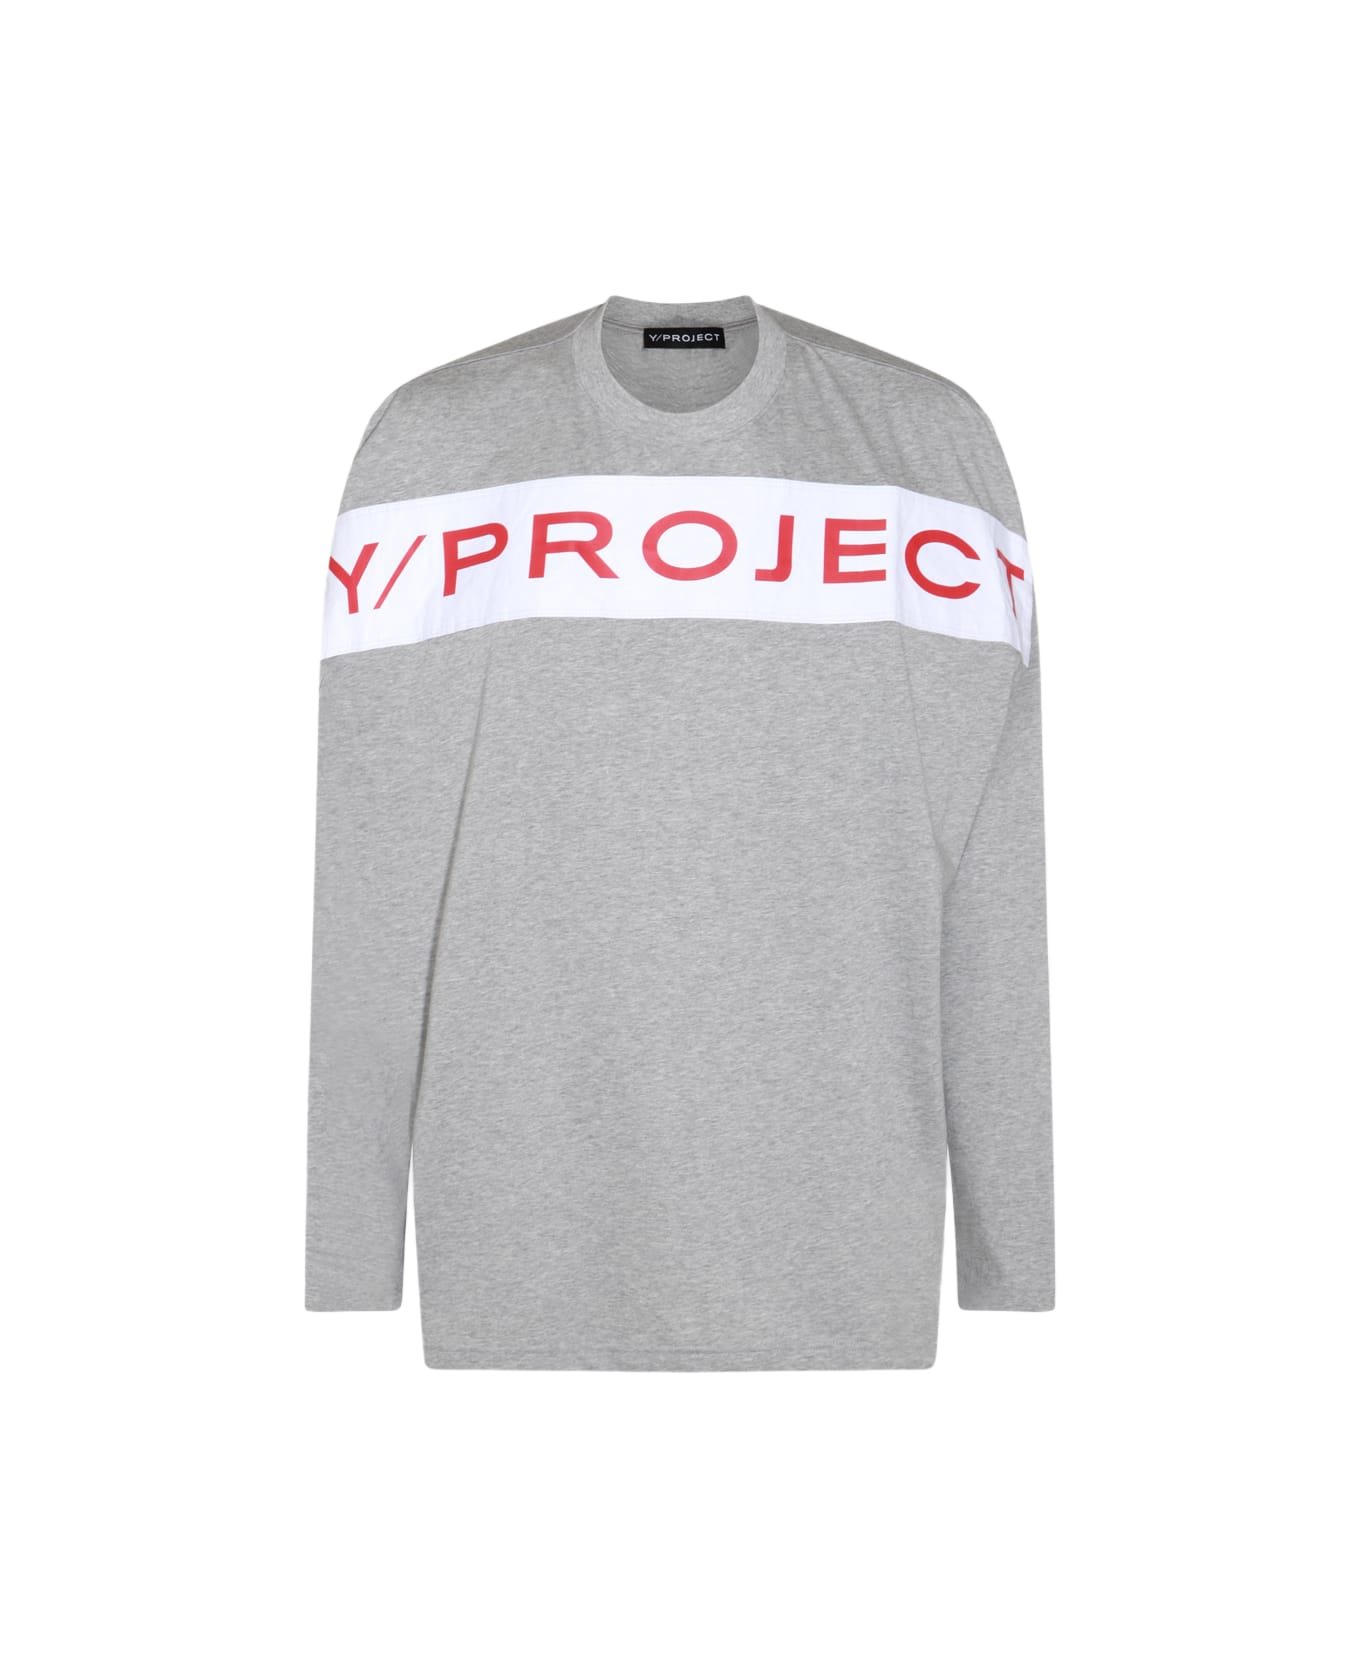 Y/Project Grey Cotton T-shirt シャツ